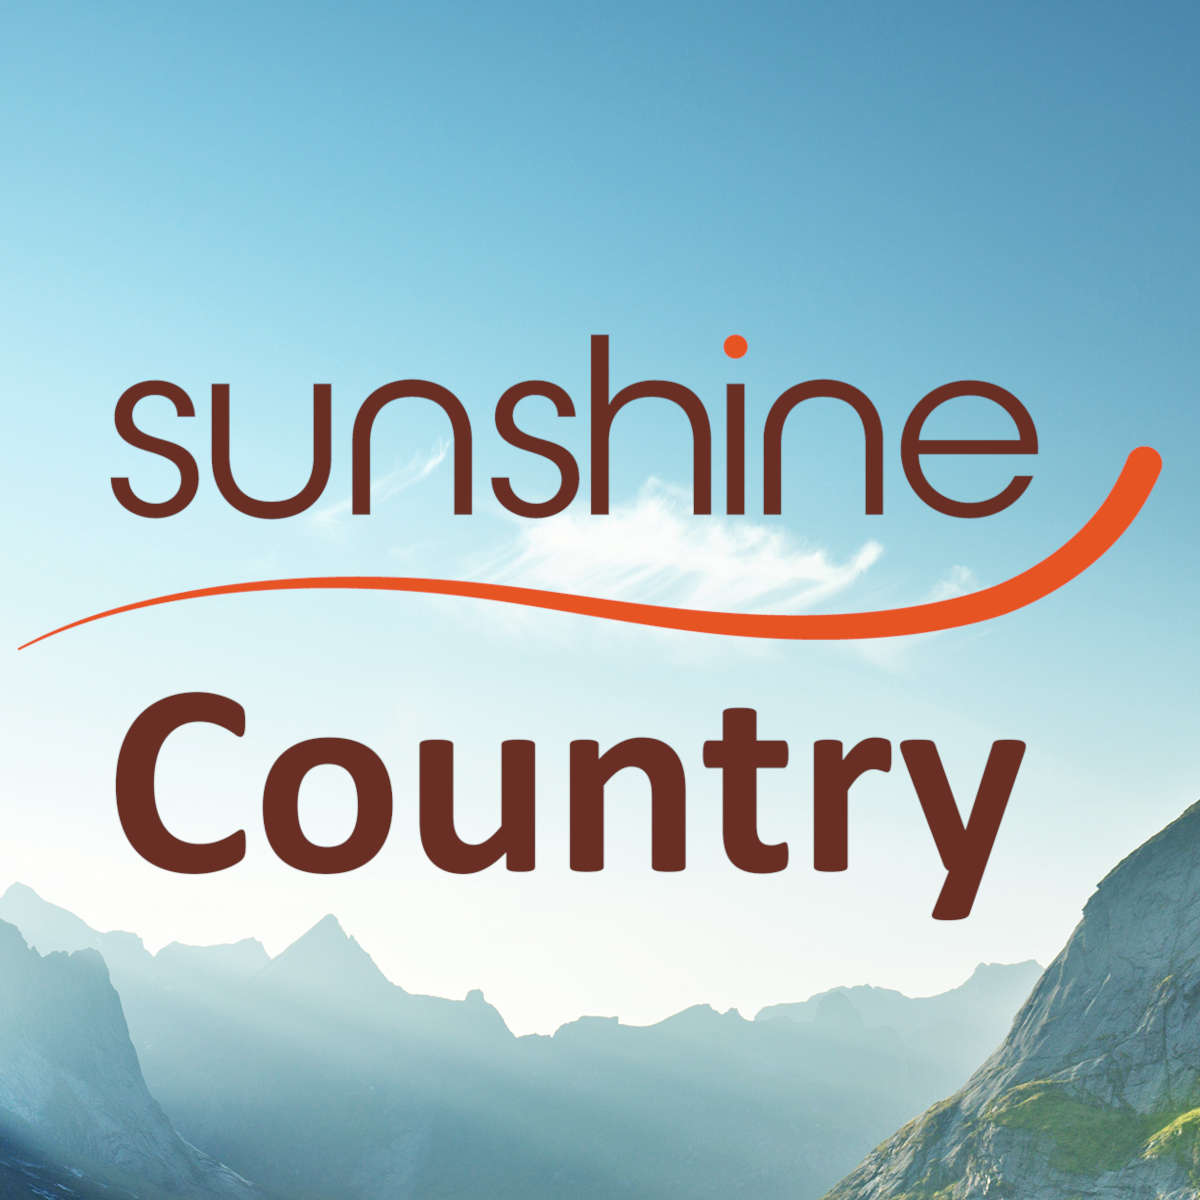 You're Listening To Sunshine Country by Sunshinecountry on Sunshine Country